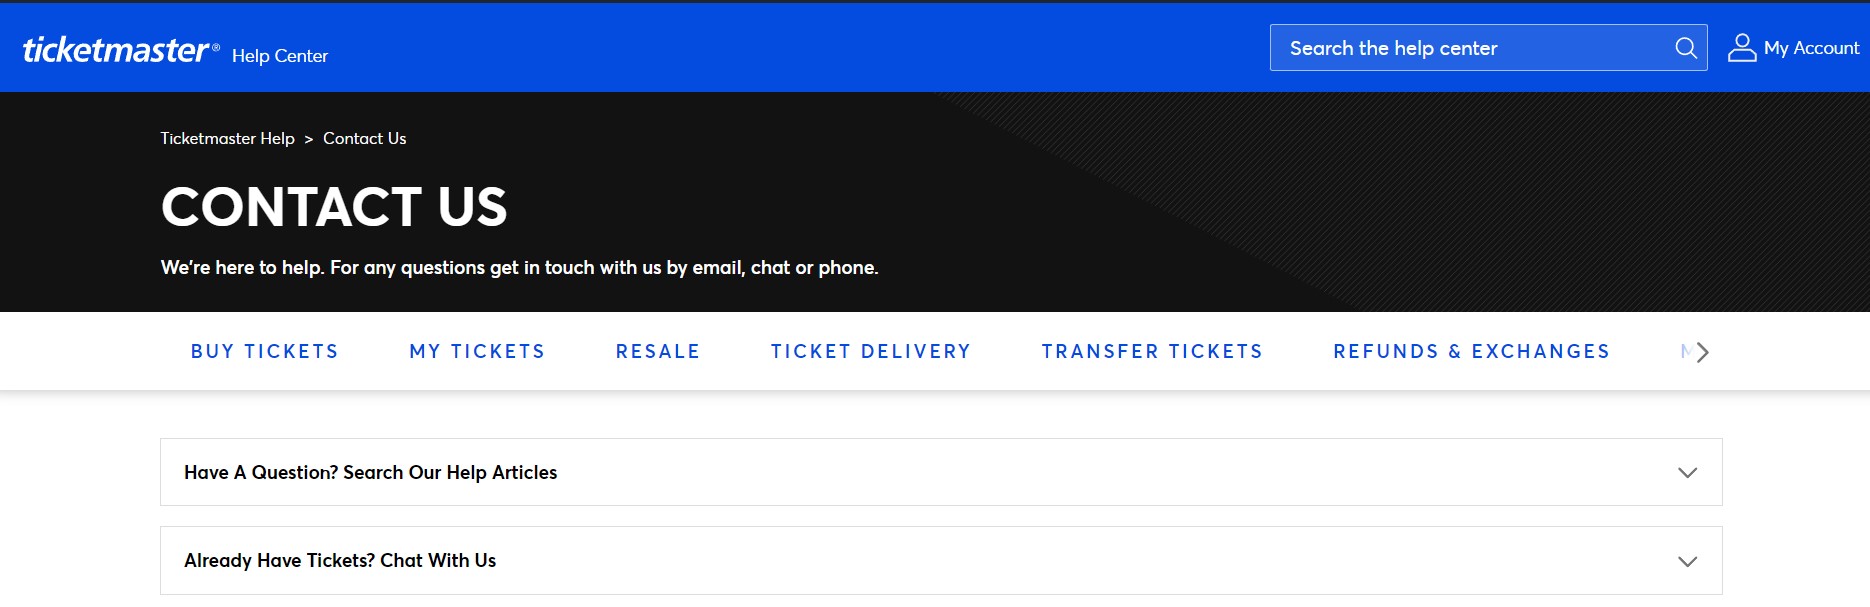 How To Fix Ticketmaster Tickets Not Showing Up NetworkBuildz